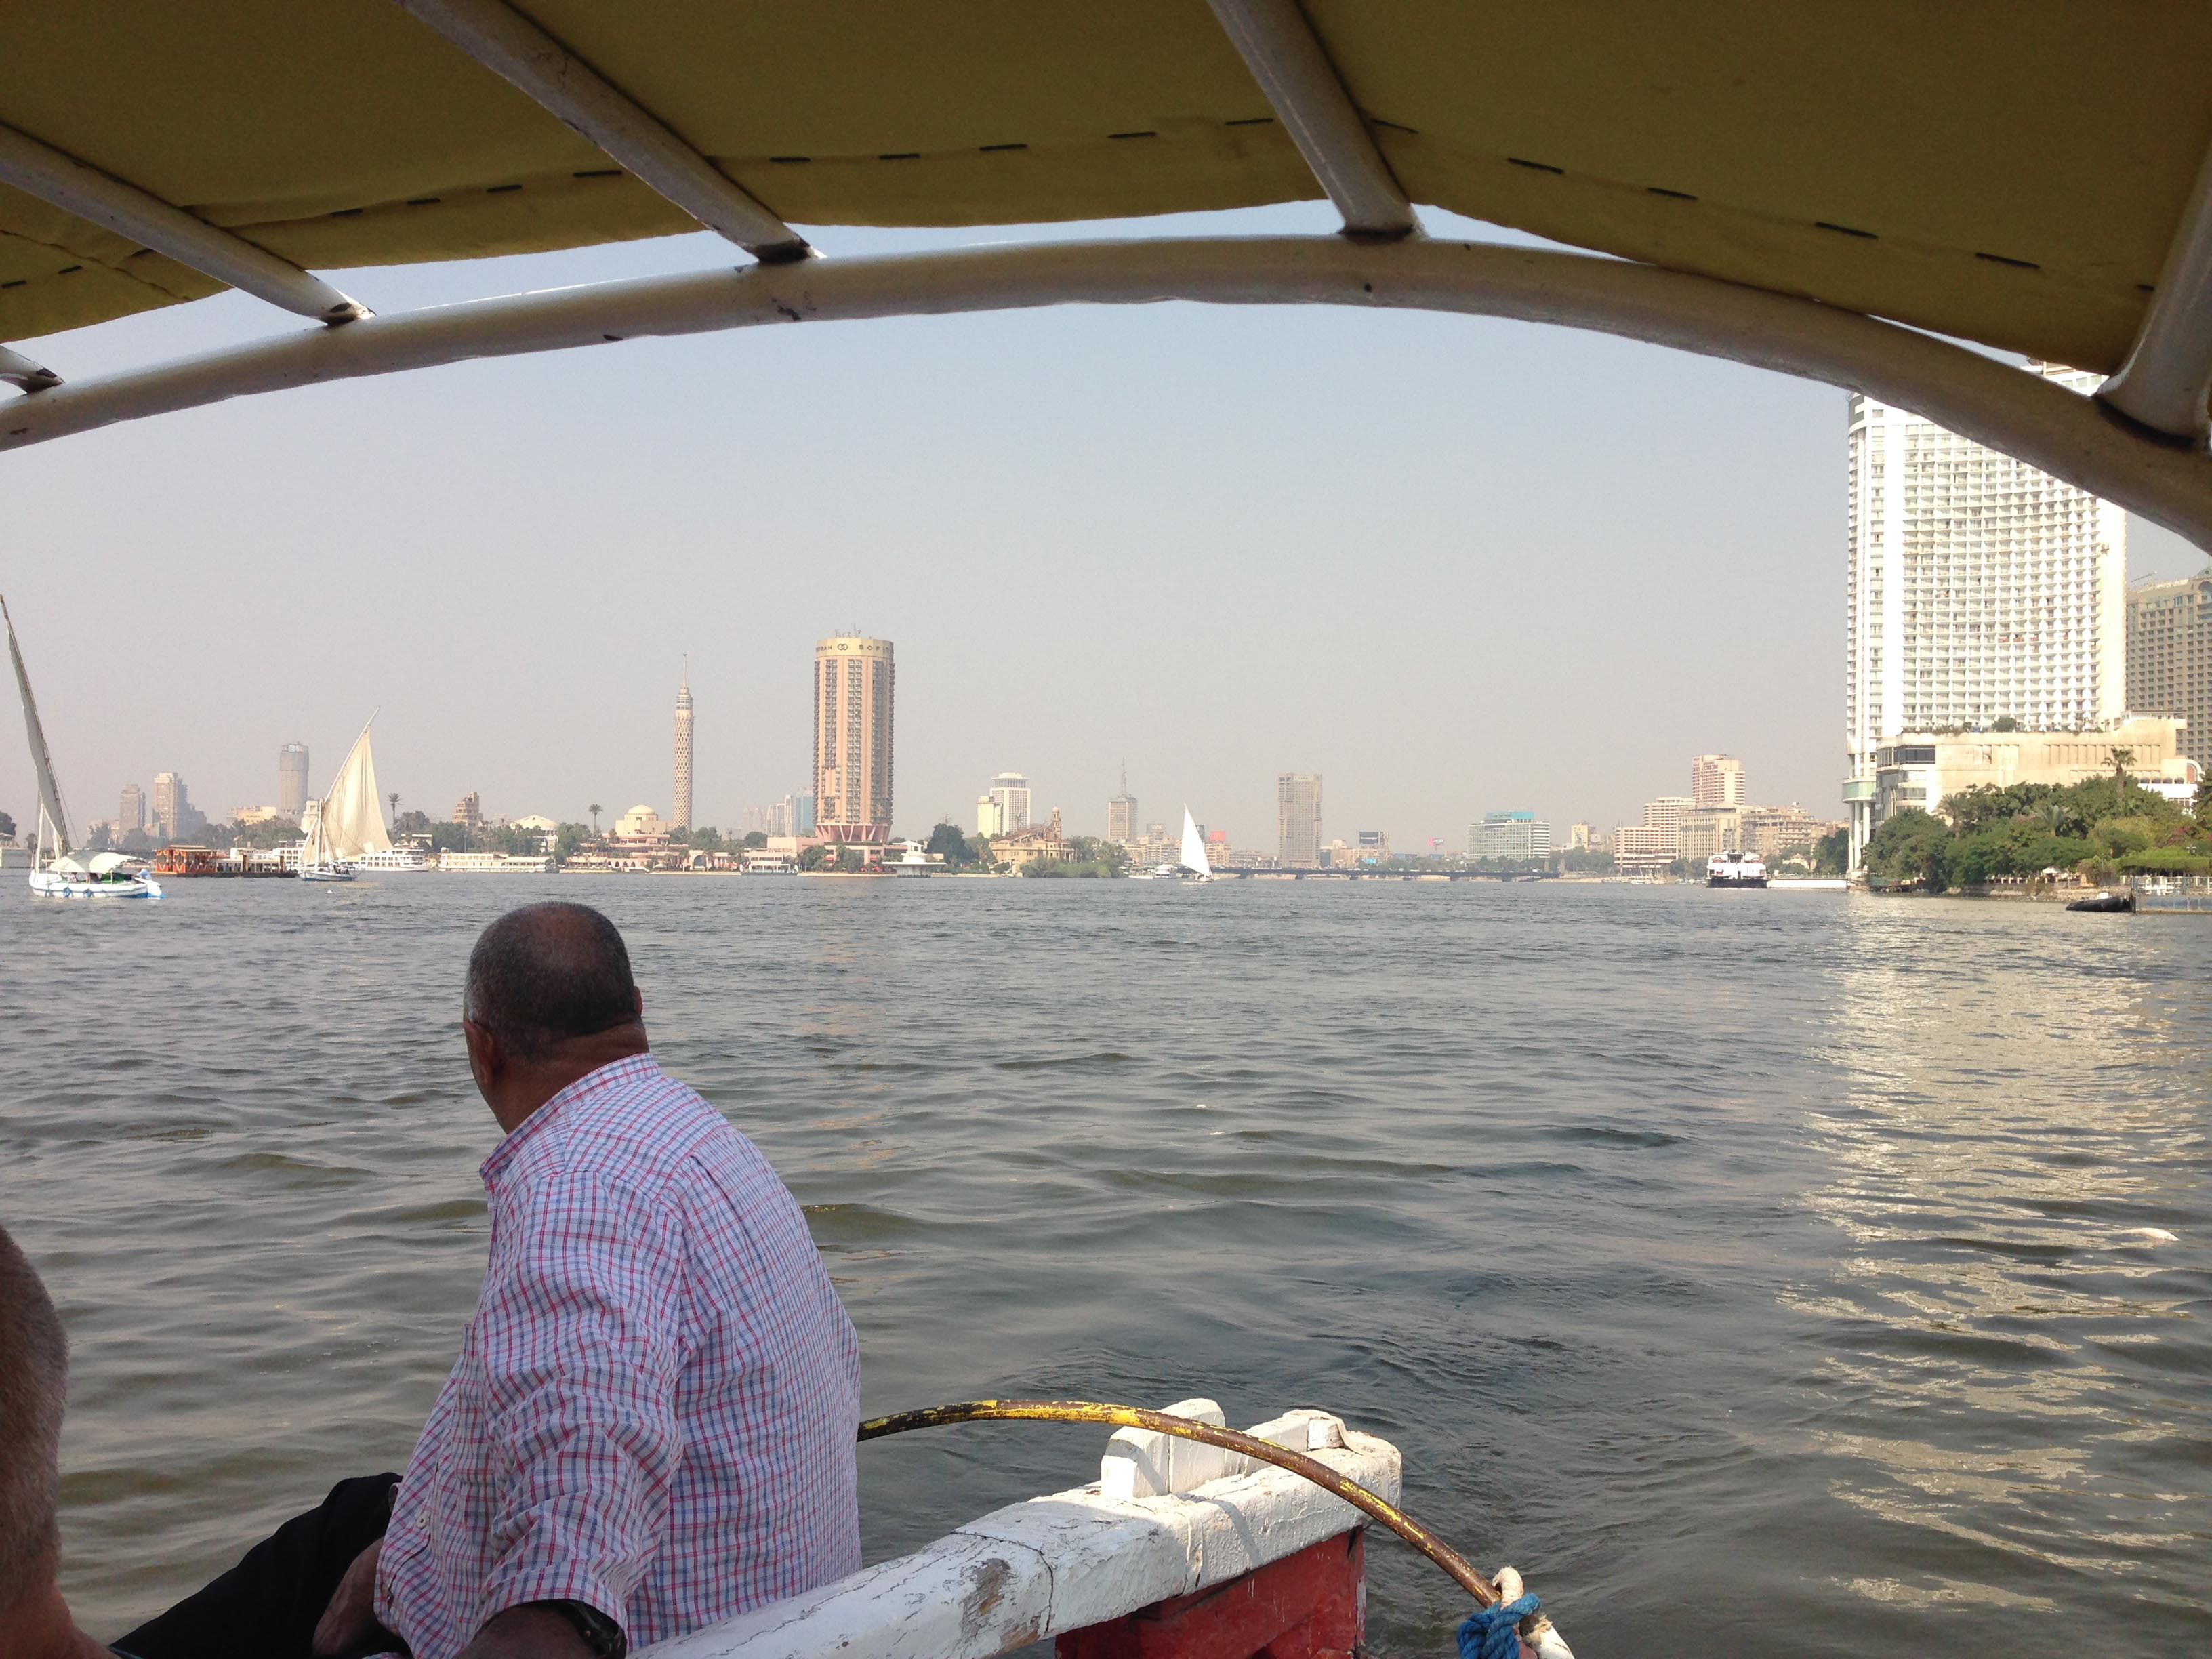 Lunch on the Nile River